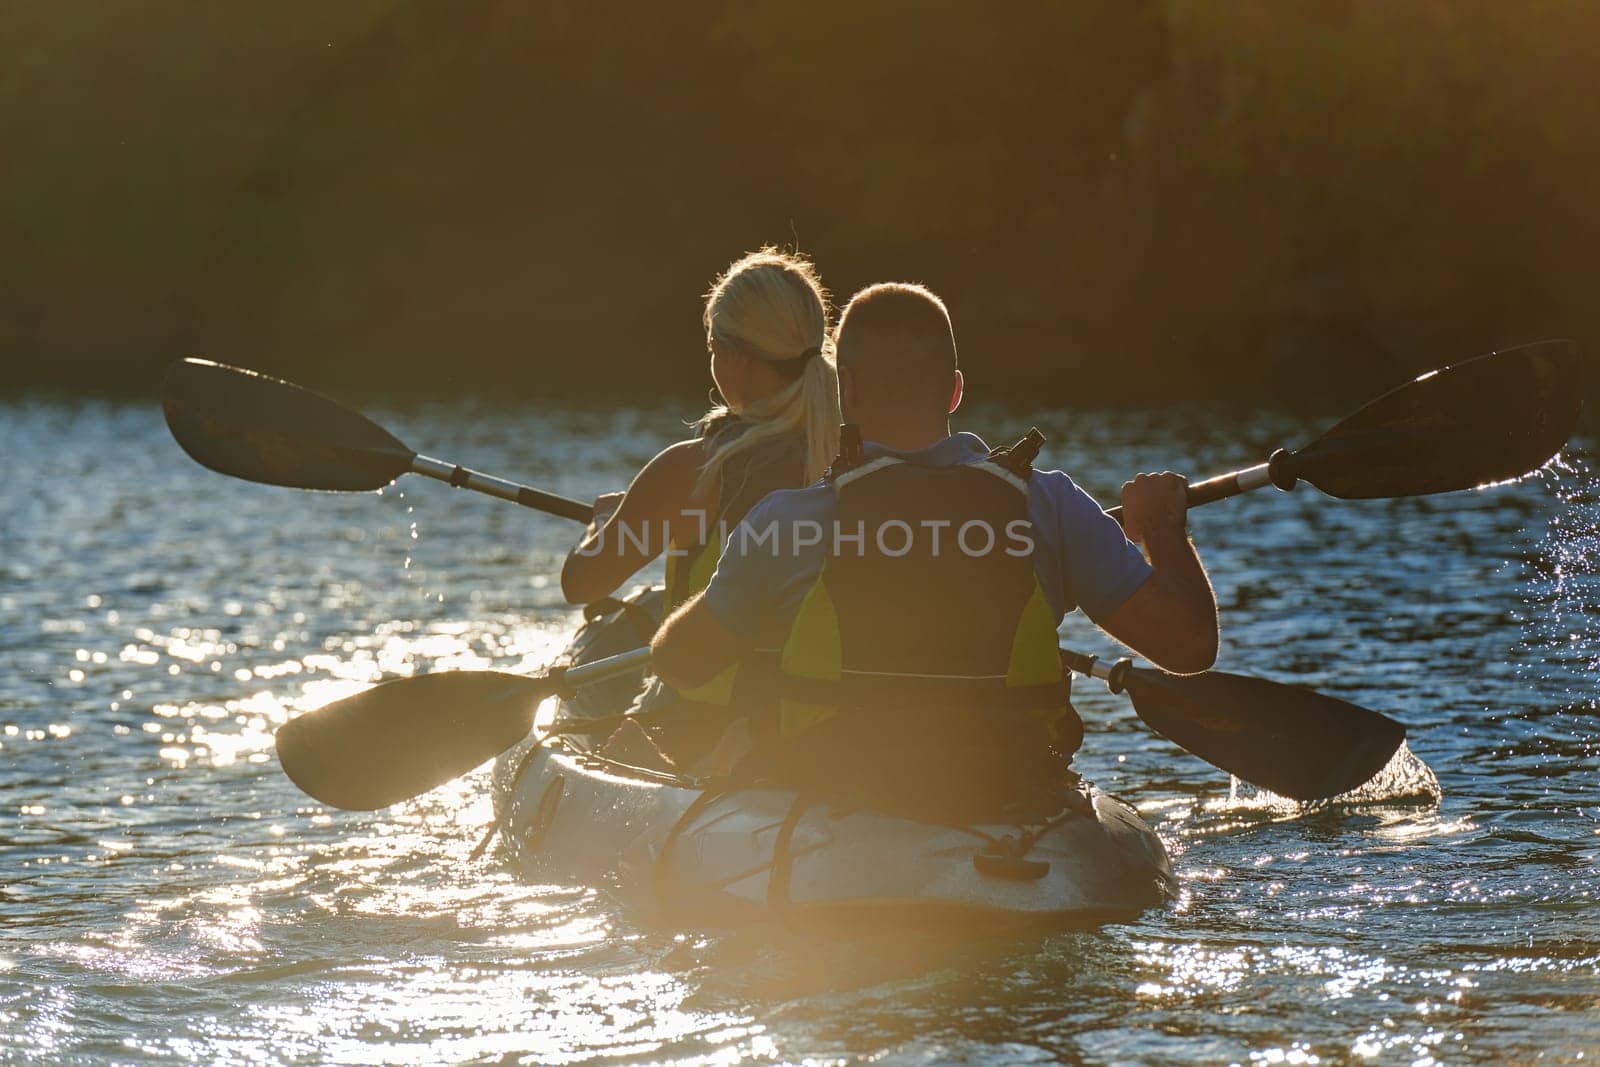 A young couple enjoying an idyllic kayak ride in the middle of a beautiful river surrounded by forest greenery in sunset time by dotshock